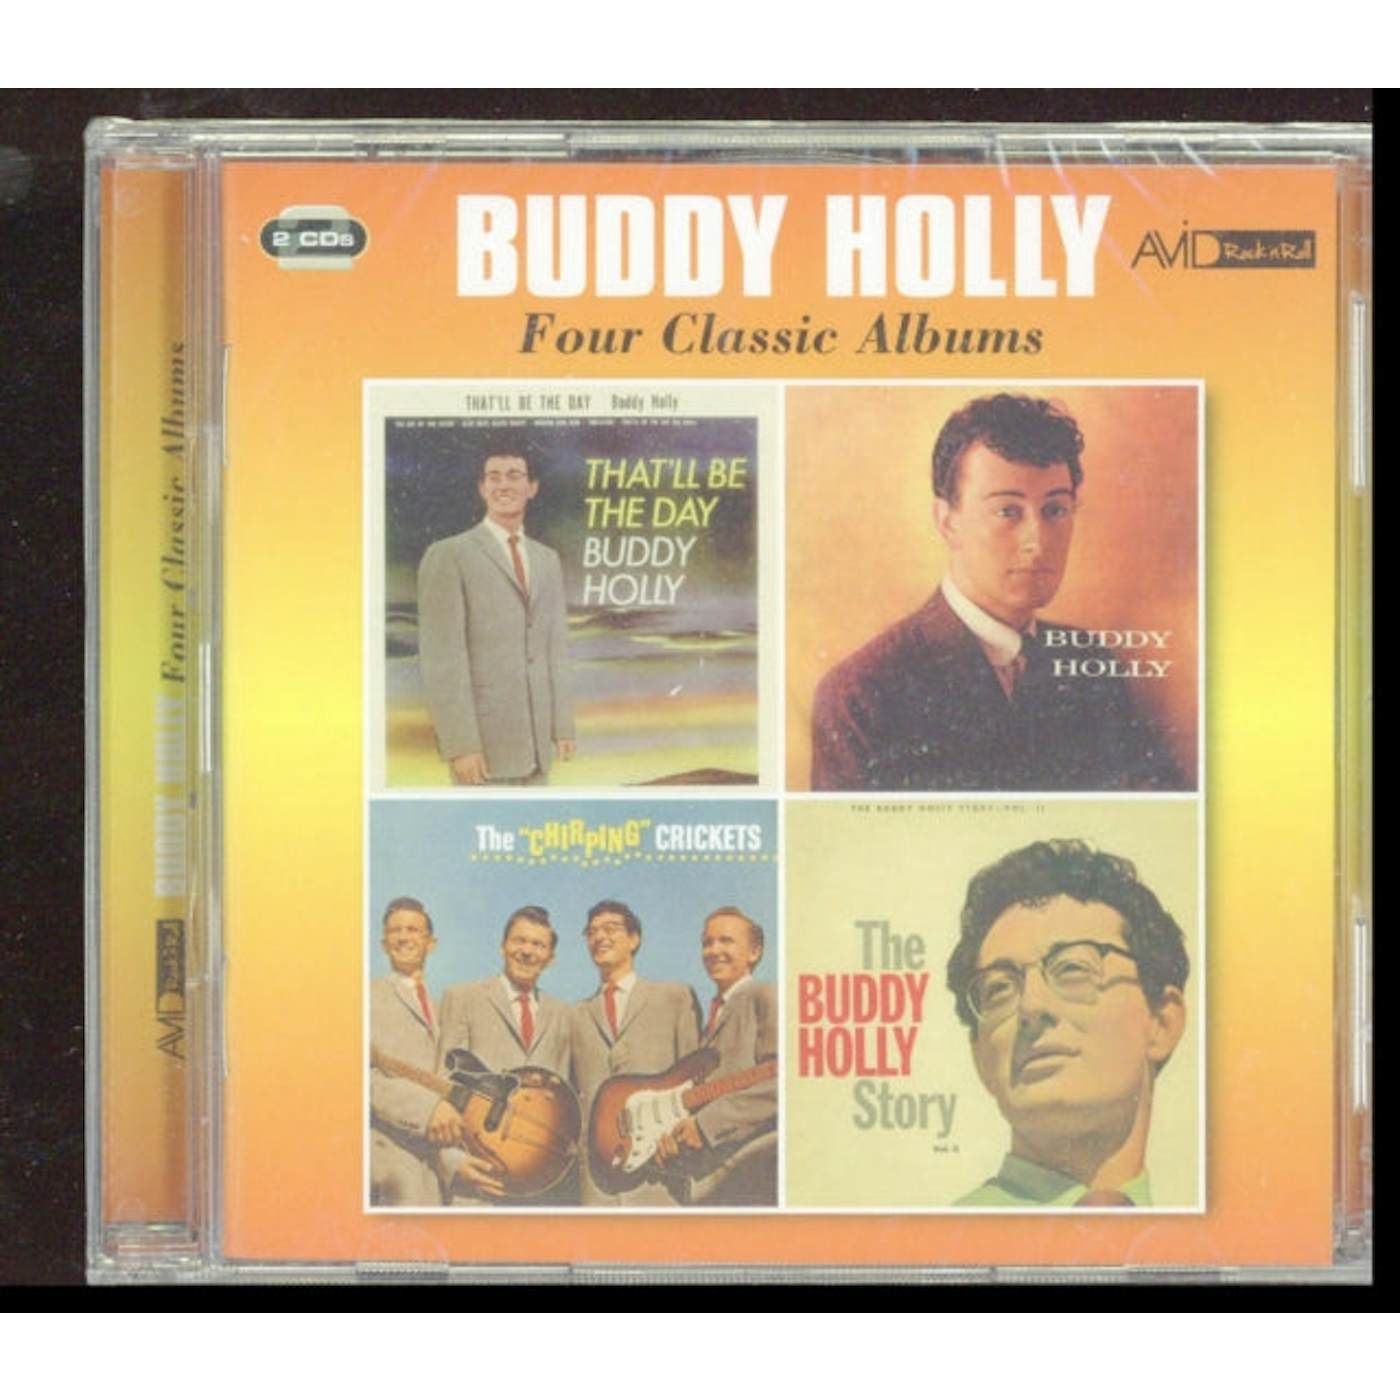 Buddy Holly CD - Four Classic Albums (That'll Be The Day / Buddy Holly / The Chirping Crickets / The Buddy Holly Story Vol 2)